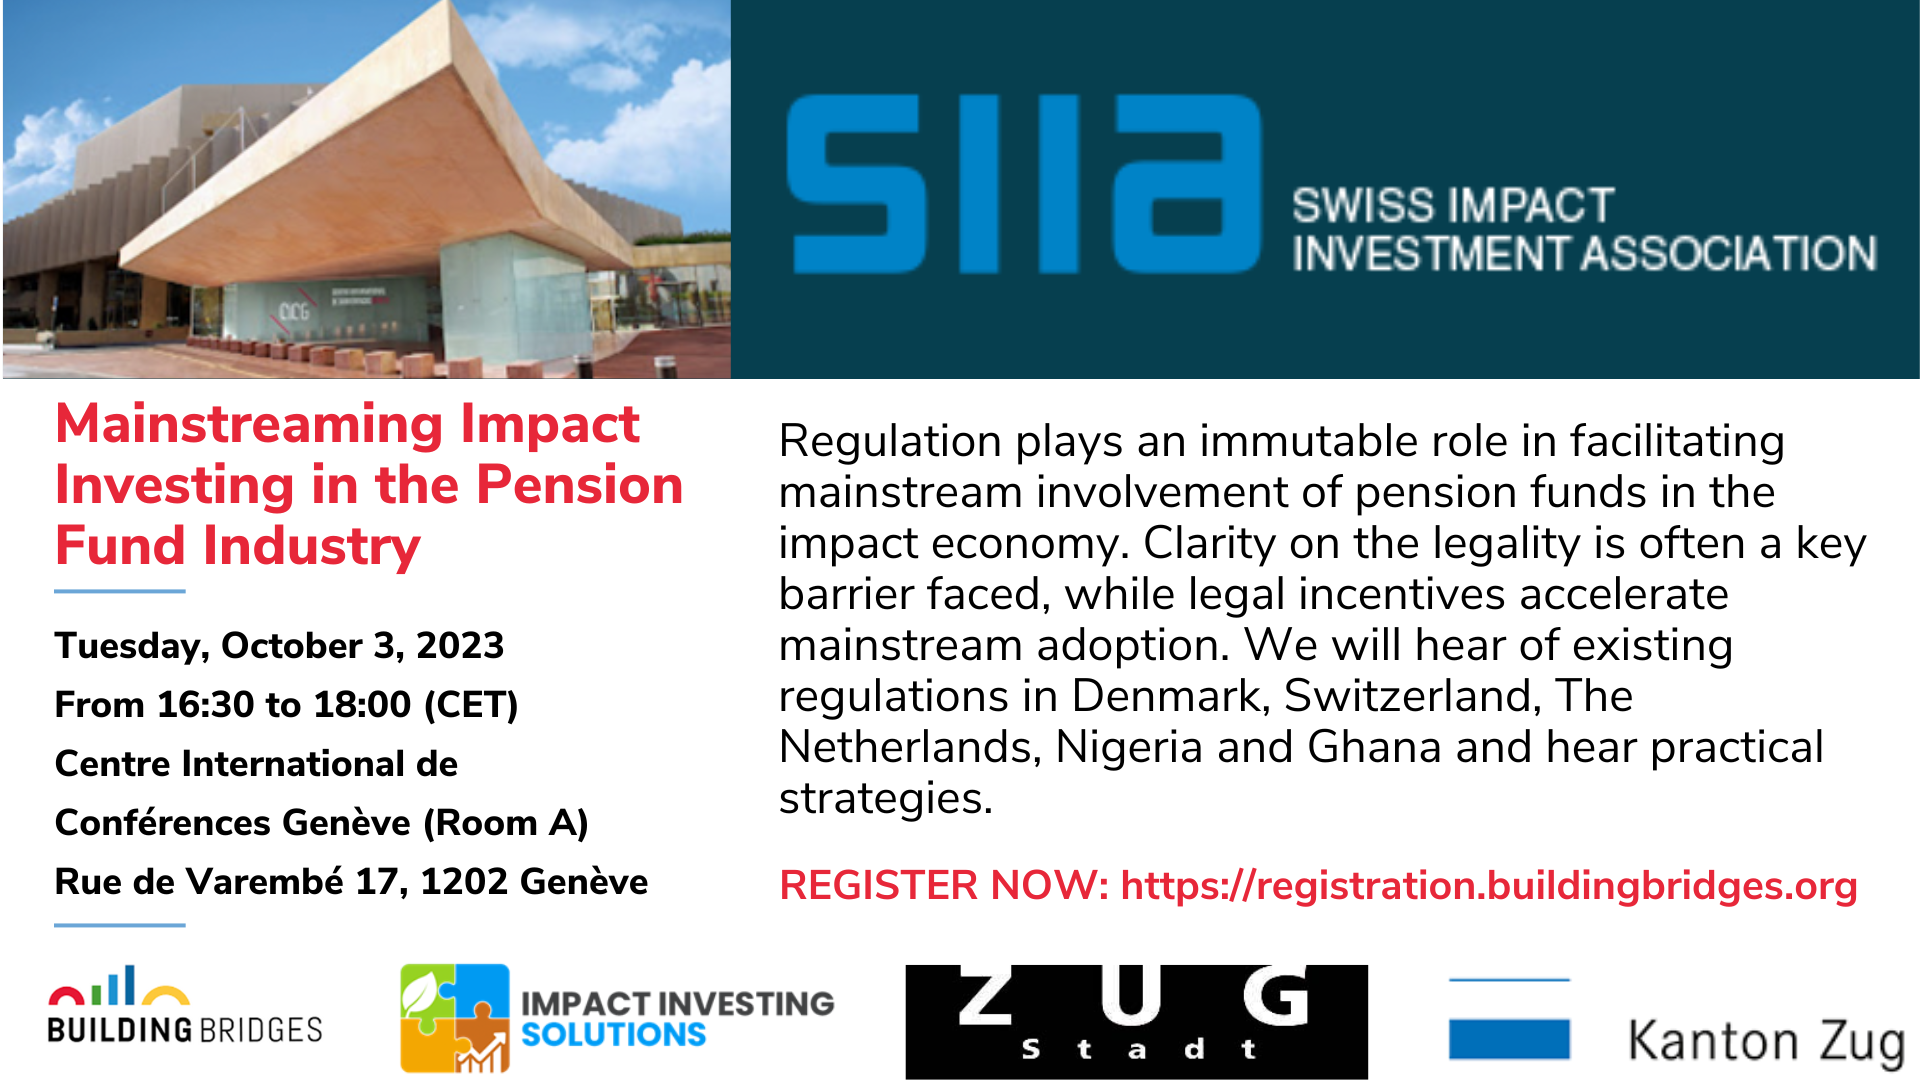 Mainstreaming Impact Investing in the Pension Fund Industry